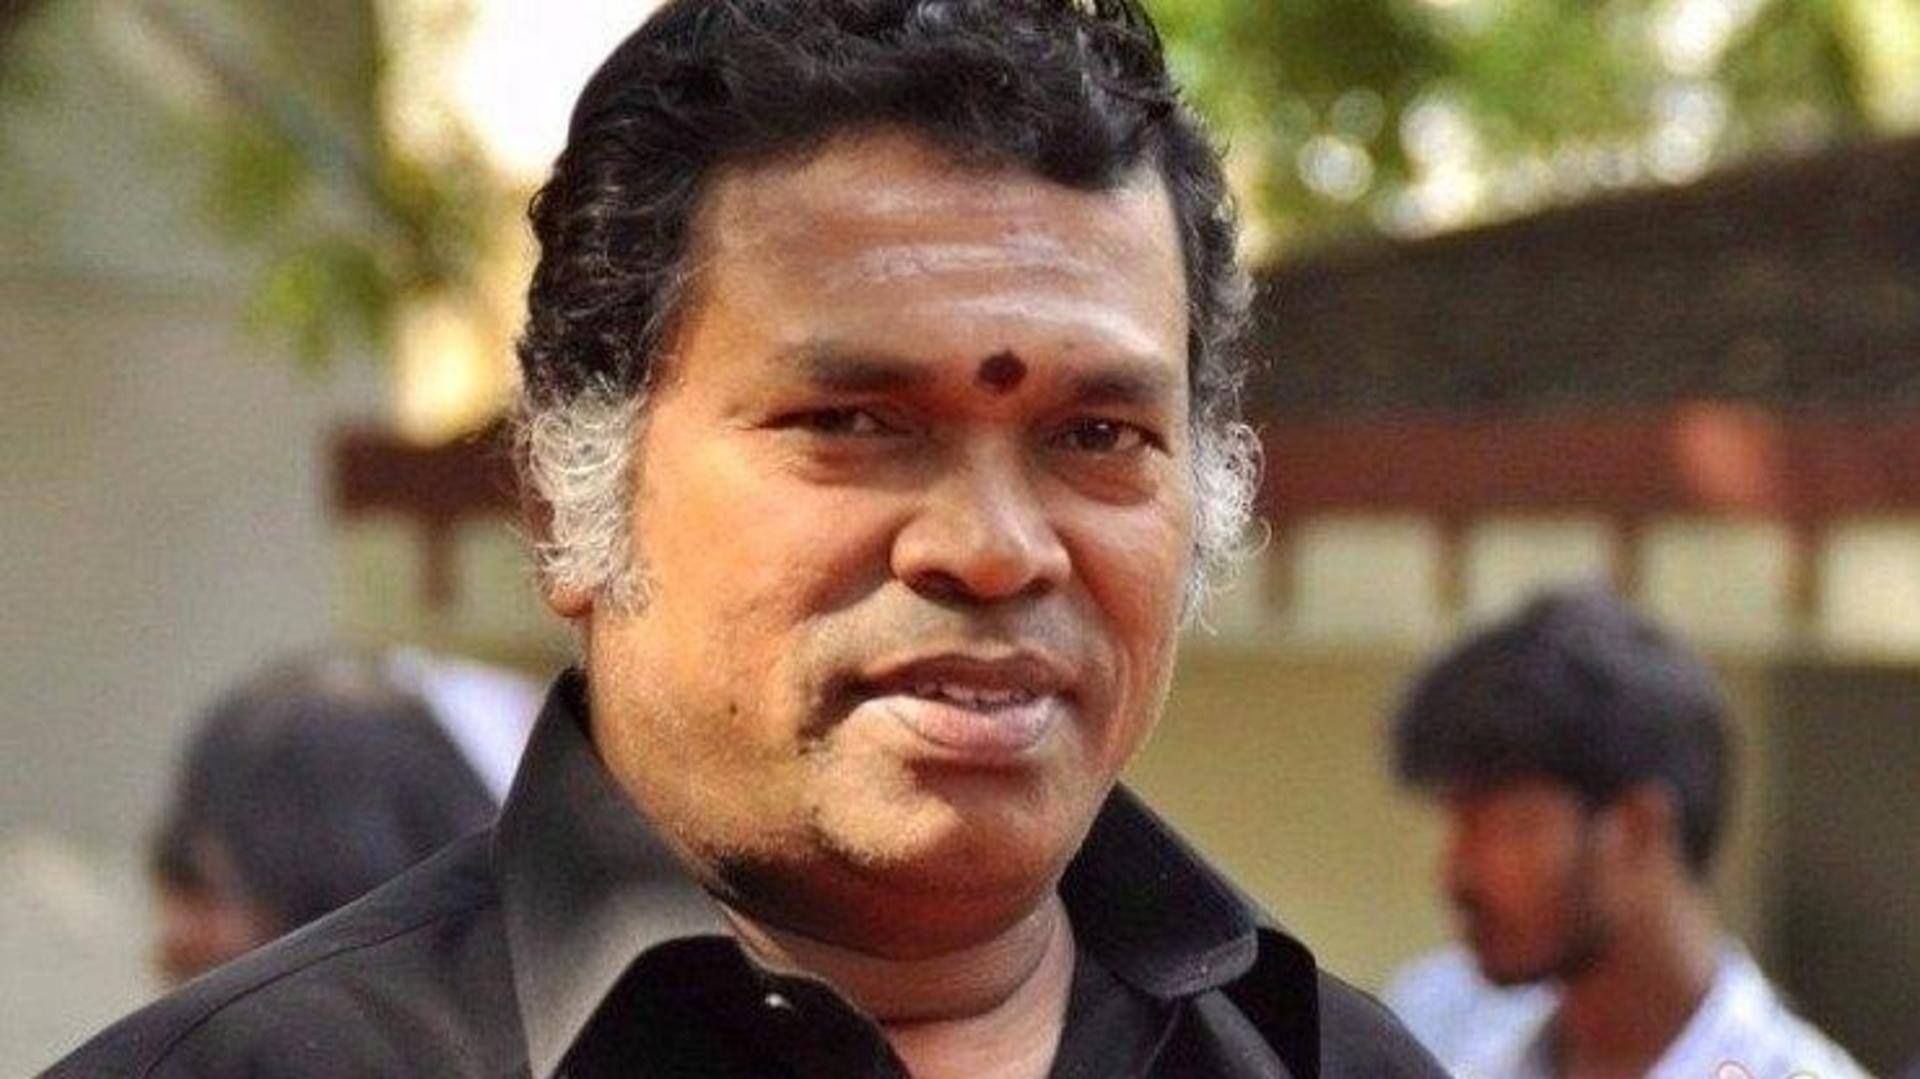 Tamil actor Mayilsamy dies aged 57 after suffering heart attack